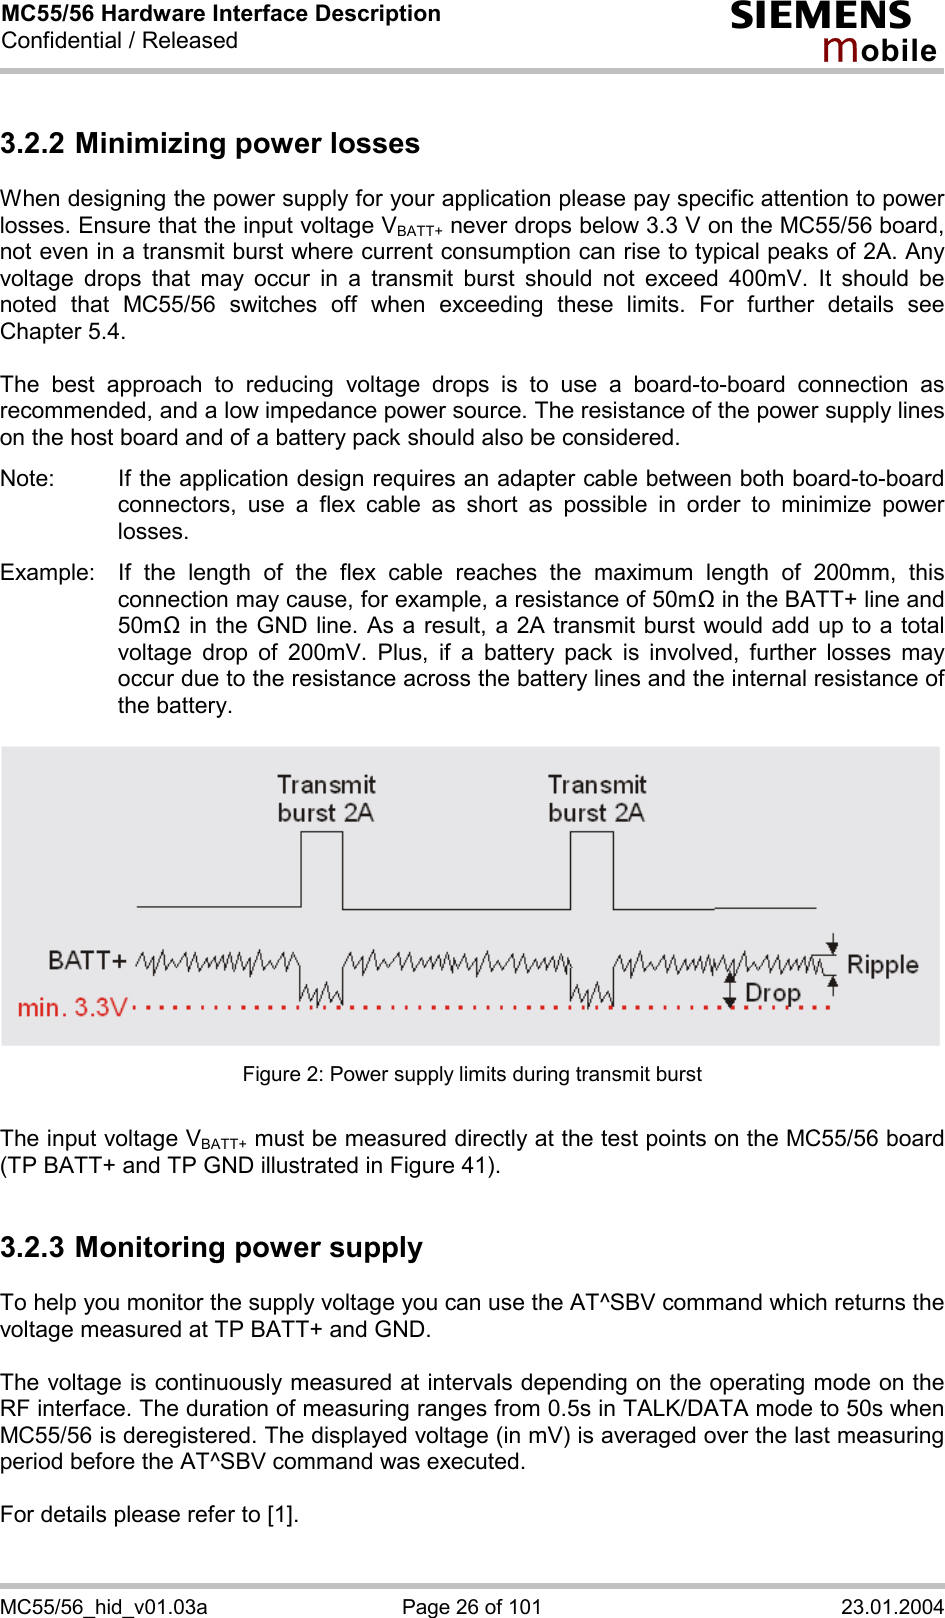 MC55/56 Hardware Interface Description Confidential / Released s mo b i l e MC55/56_hid_v01.03a  Page 26 of 101  23.01.2004 3.2.2 Minimizing power losses When designing the power supply for your application please pay specific attention to power losses. Ensure that the input voltage VBATT+ never drops below 3.3 V on the MC55/56 board, not even in a transmit burst where current consumption can rise to typical peaks of 2A. Any voltage drops that may occur in a transmit burst should not exceed 400mV. It should be noted that MC55/56 switches off when exceeding these limits. For further details see Chapter 5.4.  The best approach to reducing voltage drops is to use a board-to-board connection as recommended, and a low impedance power source. The resistance of the power supply lines on the host board and of a battery pack should also be considered.  Note:  If the application design requires an adapter cable between both board-to-board connectors, use a flex cable as short as possible in order to minimize power losses.   Example:  If the length of the flex cable reaches the maximum length of 200mm, this connection may cause, for example, a resistance of 50m! in the BATT+ line and 50m! in the GND line. As a result, a 2A transmit burst would add up to a total voltage drop of 200mV. Plus, if a battery pack is involved, further losses may occur due to the resistance across the battery lines and the internal resistance of the battery.    Figure 2: Power supply limits during transmit burst  The input voltage VBATT+ must be measured directly at the test points on the MC55/56 board (TP BATT+ and TP GND illustrated in Figure 41).  3.2.3 Monitoring power supply To help you monitor the supply voltage you can use the AT^SBV command which returns the voltage measured at TP BATT+ and GND.   The voltage is continuously measured at intervals depending on the operating mode on the RF interface. The duration of measuring ranges from 0.5s in TALK/DATA mode to 50s when MC55/56 is deregistered. The displayed voltage (in mV) is averaged over the last measuring period before the AT^SBV command was executed.   For details please refer to [1].   